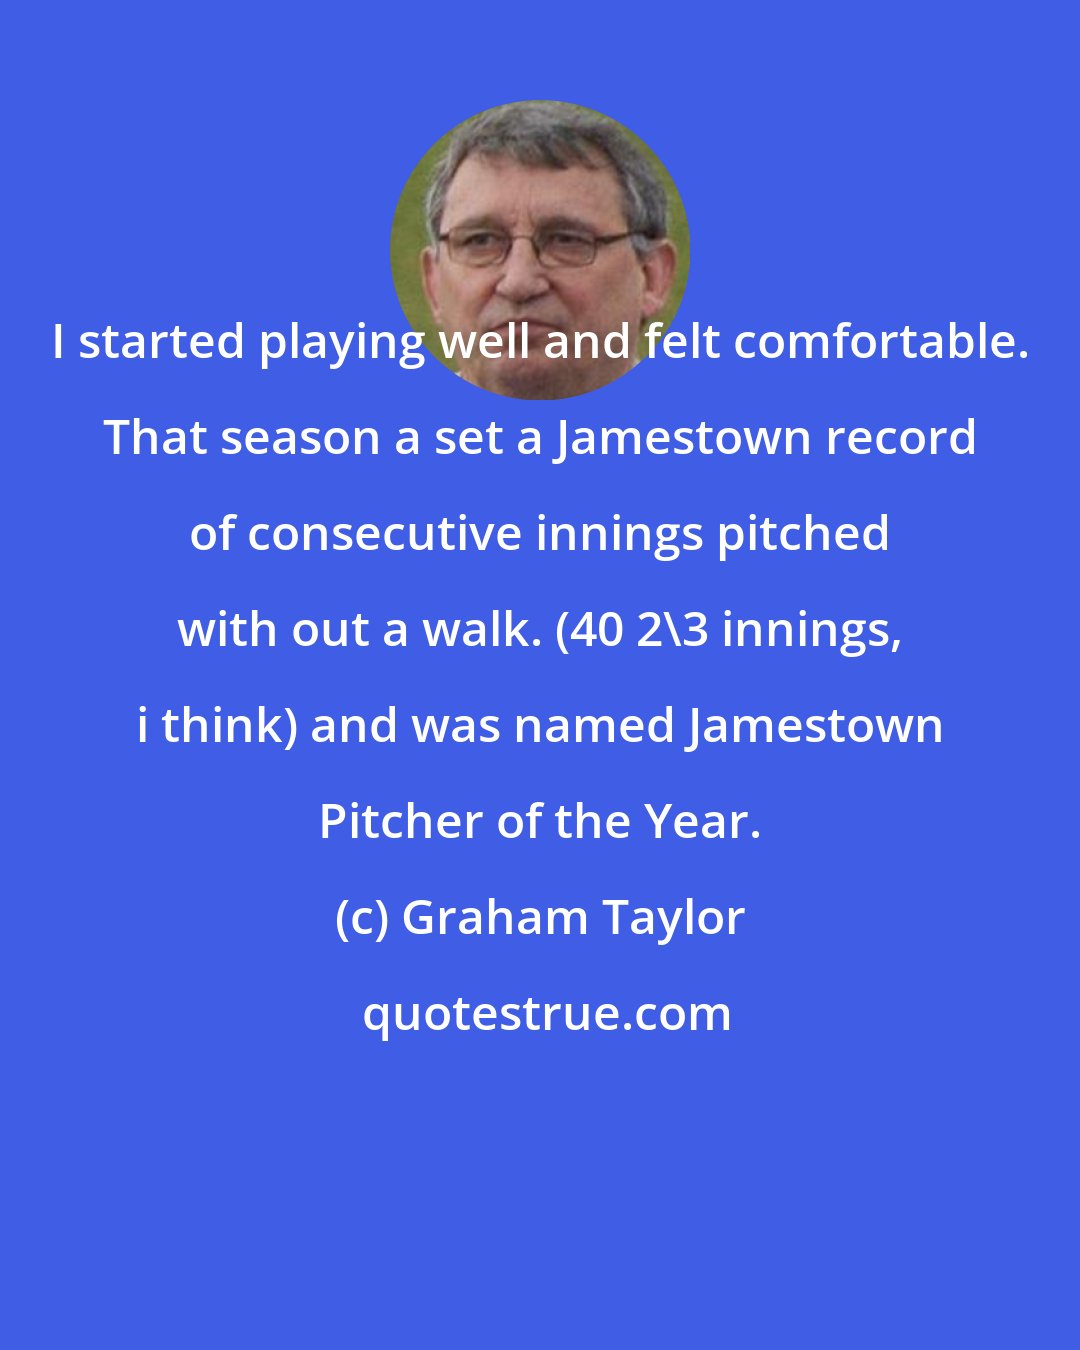 Graham Taylor: I started playing well and felt comfortable. That season a set a Jamestown record of consecutive innings pitched with out a walk. (40 2\3 innings, i think) and was named Jamestown Pitcher of the Year.